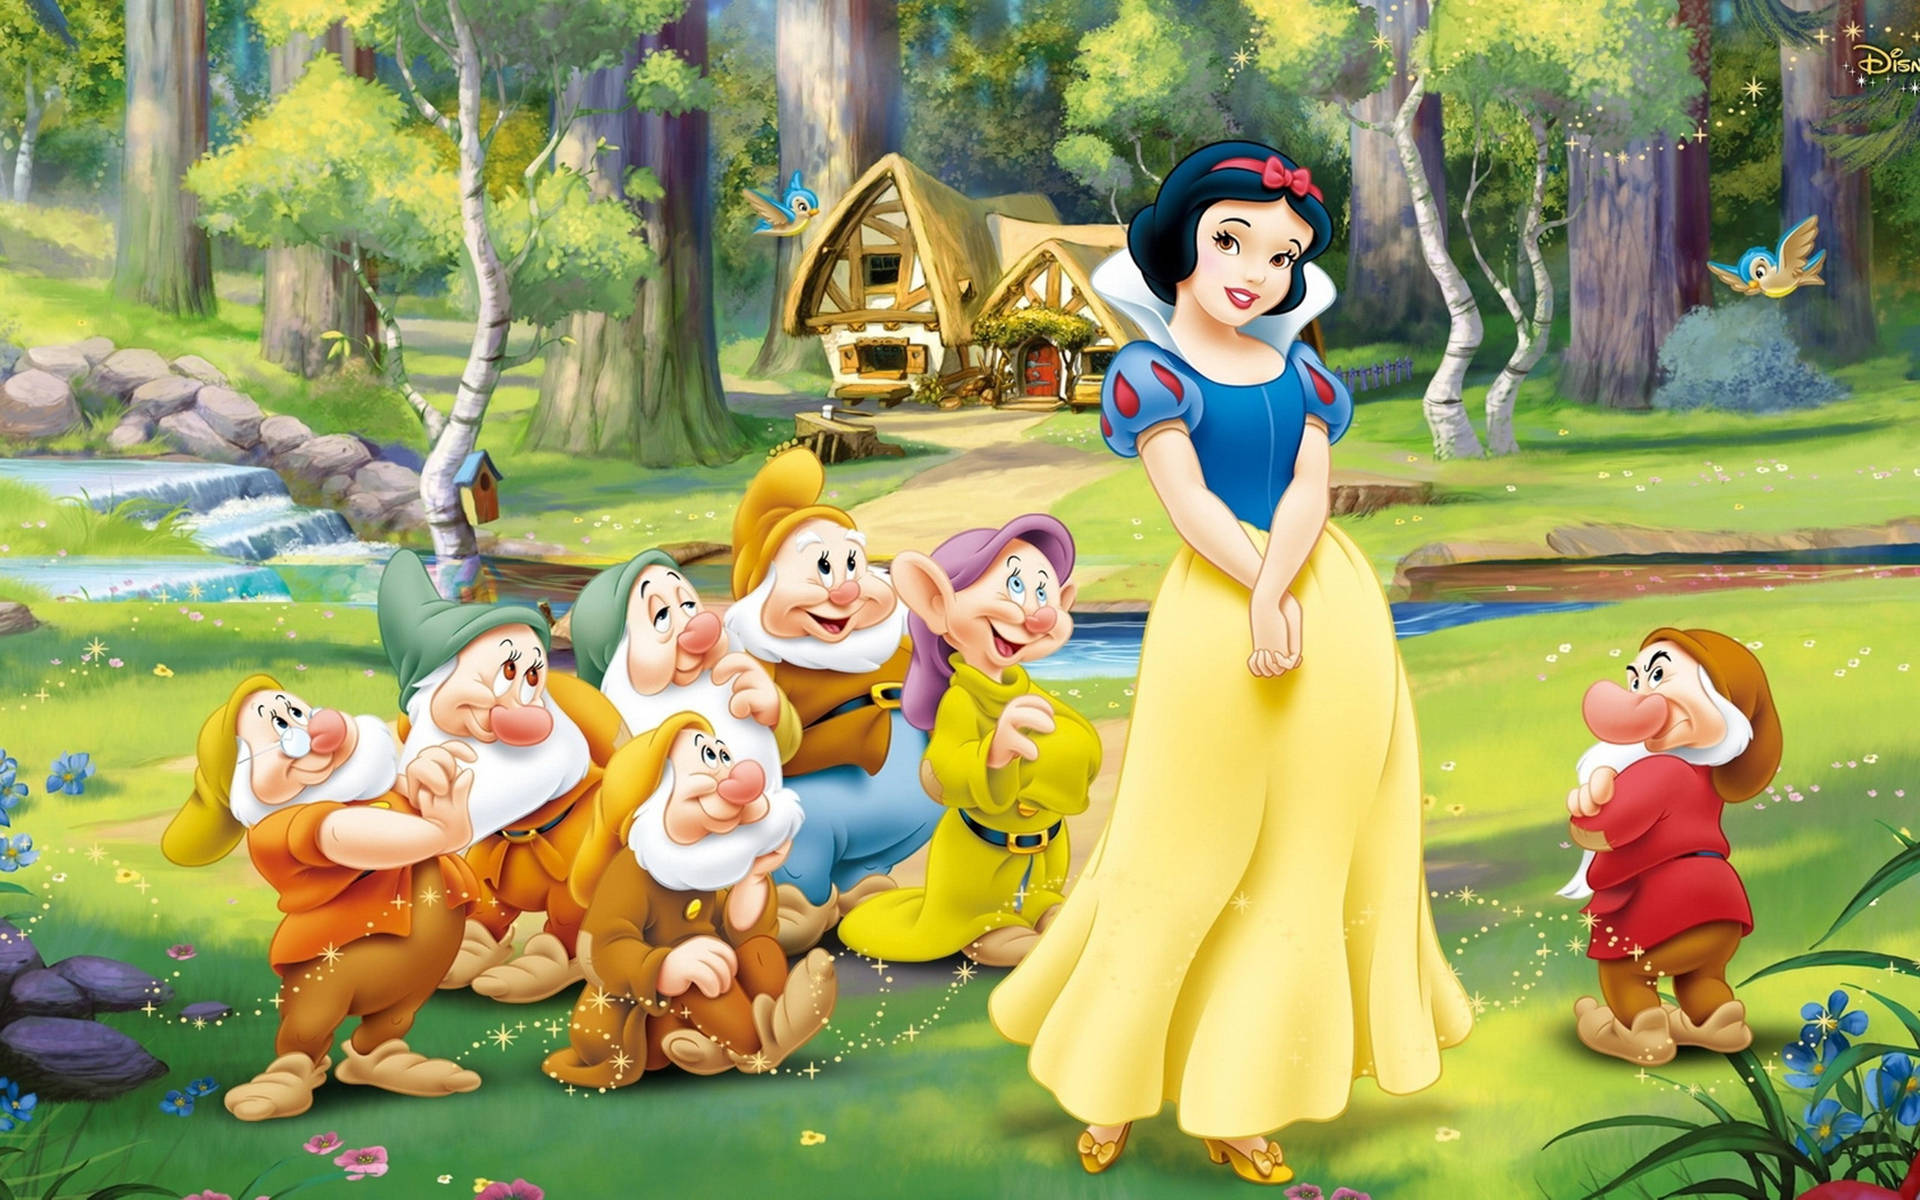 "Disney Princess - Snow White Cheerful Moment with her Loyal Dwarfs" Wallpaper